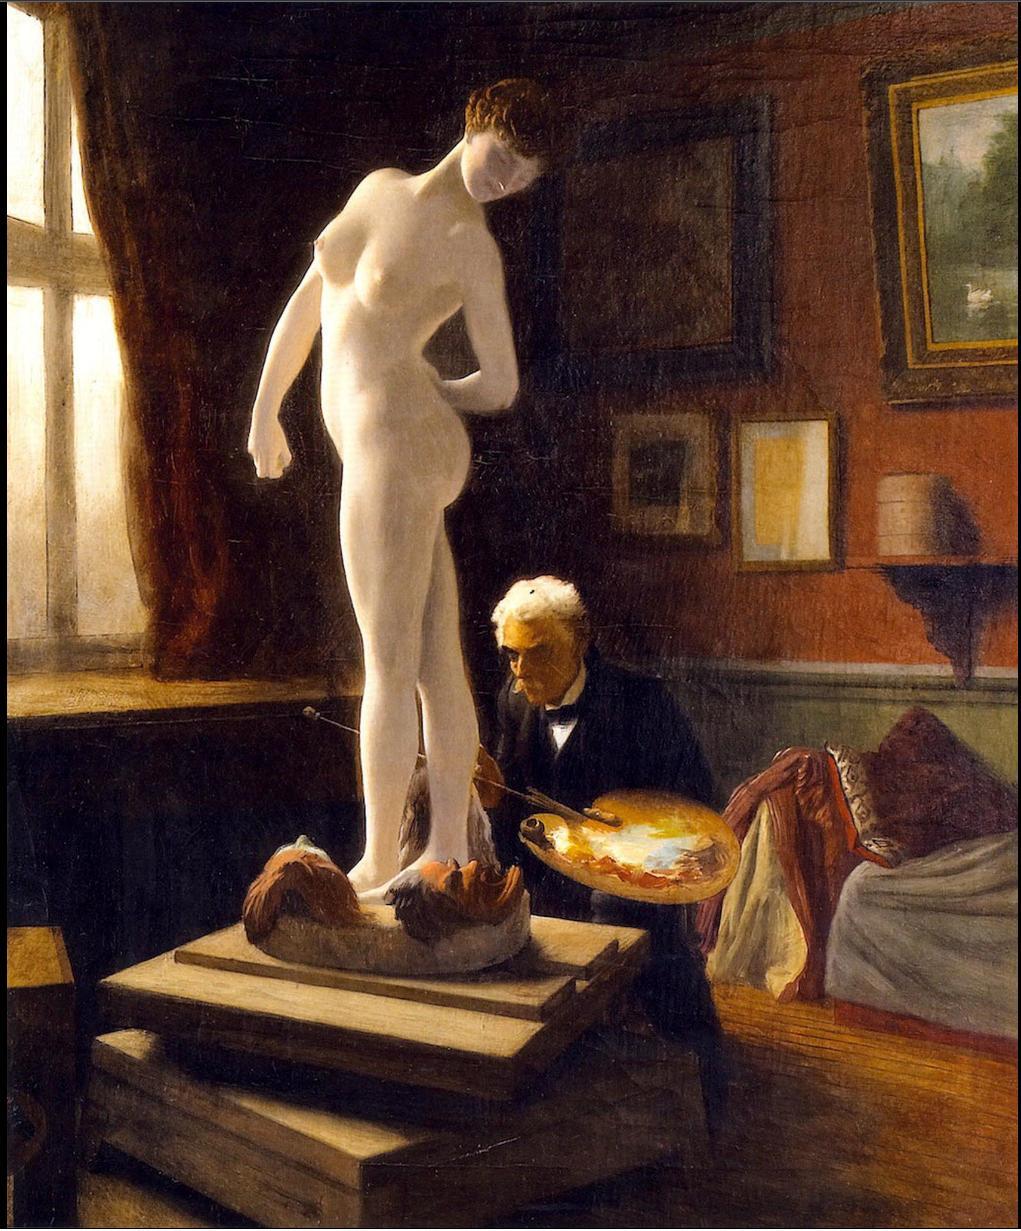 Self-portrait, painting The Ball Player, Jean-Leon Gerome